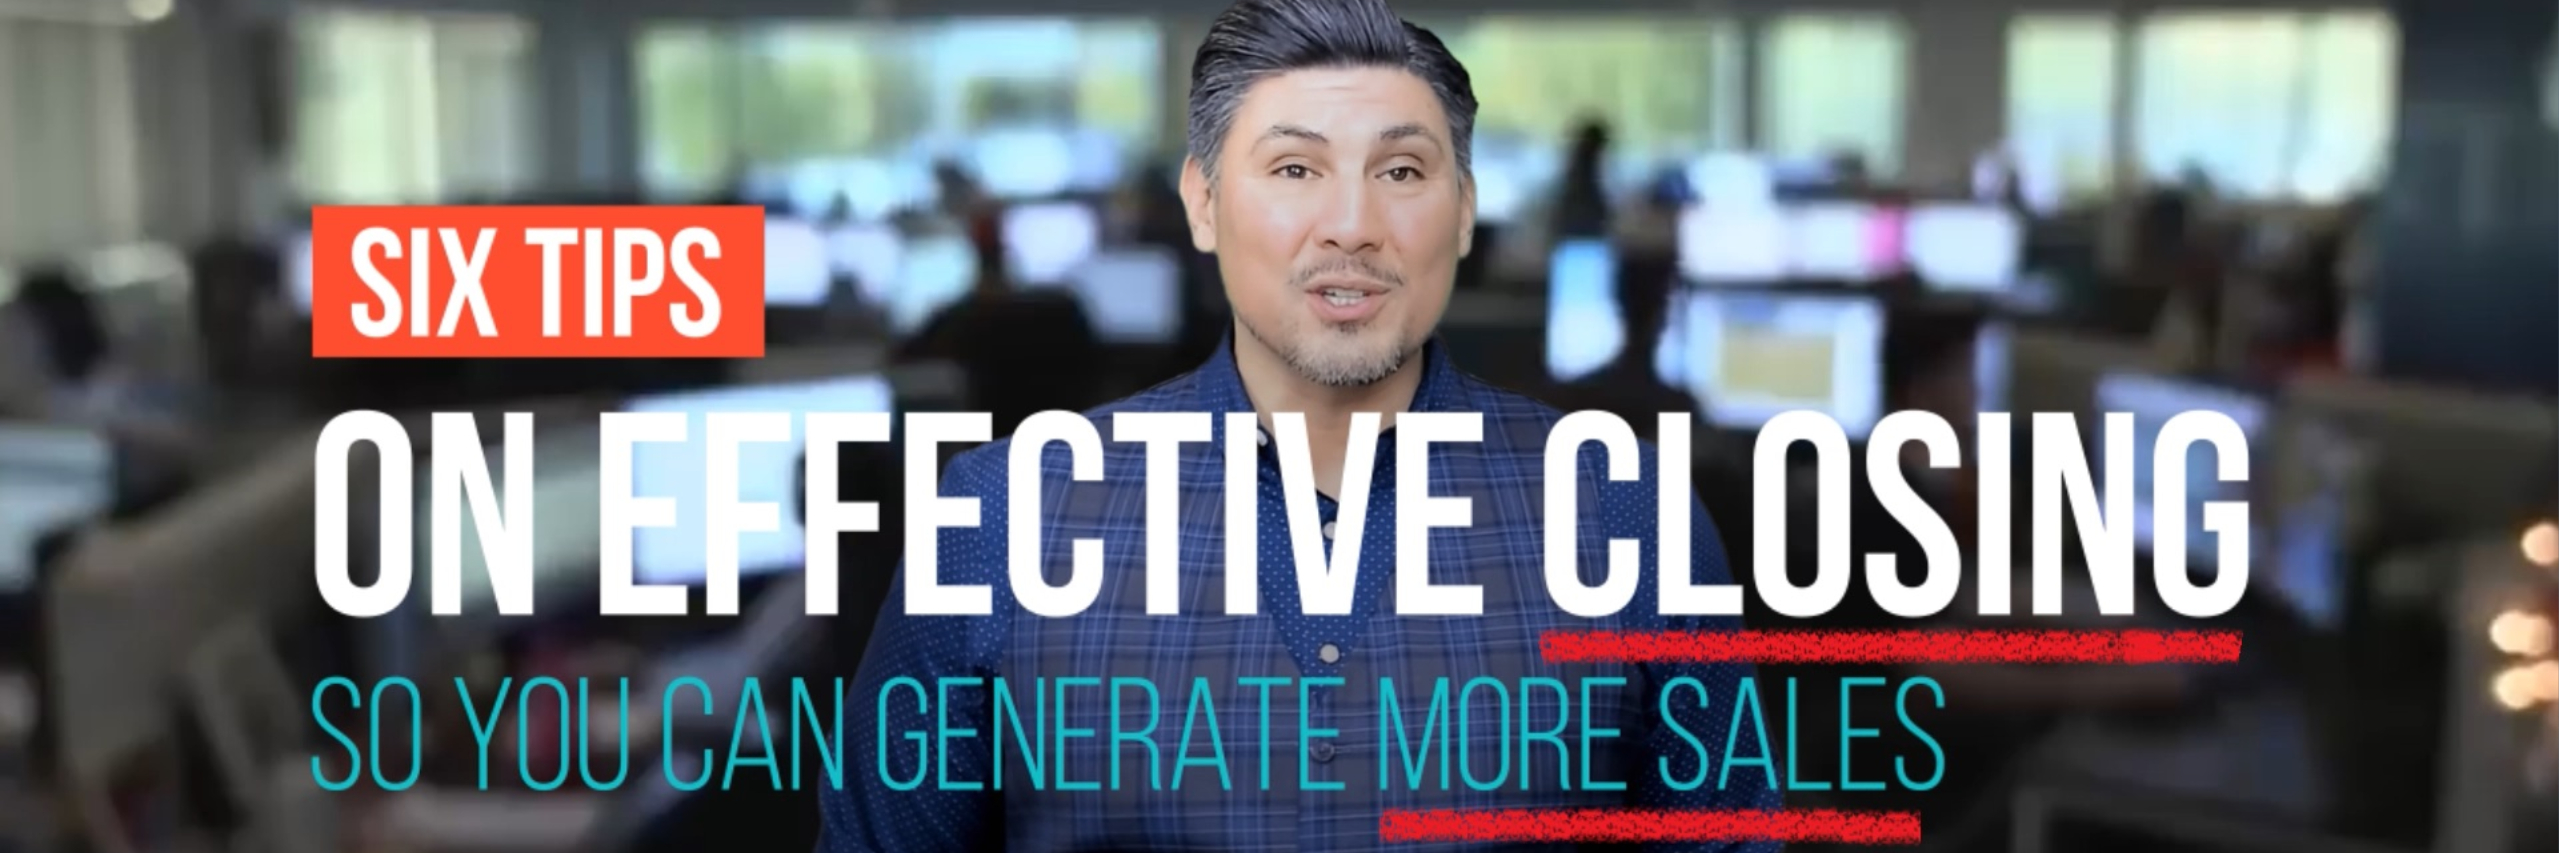 Six Tips On Effective Closing So You Can Generate More Sales